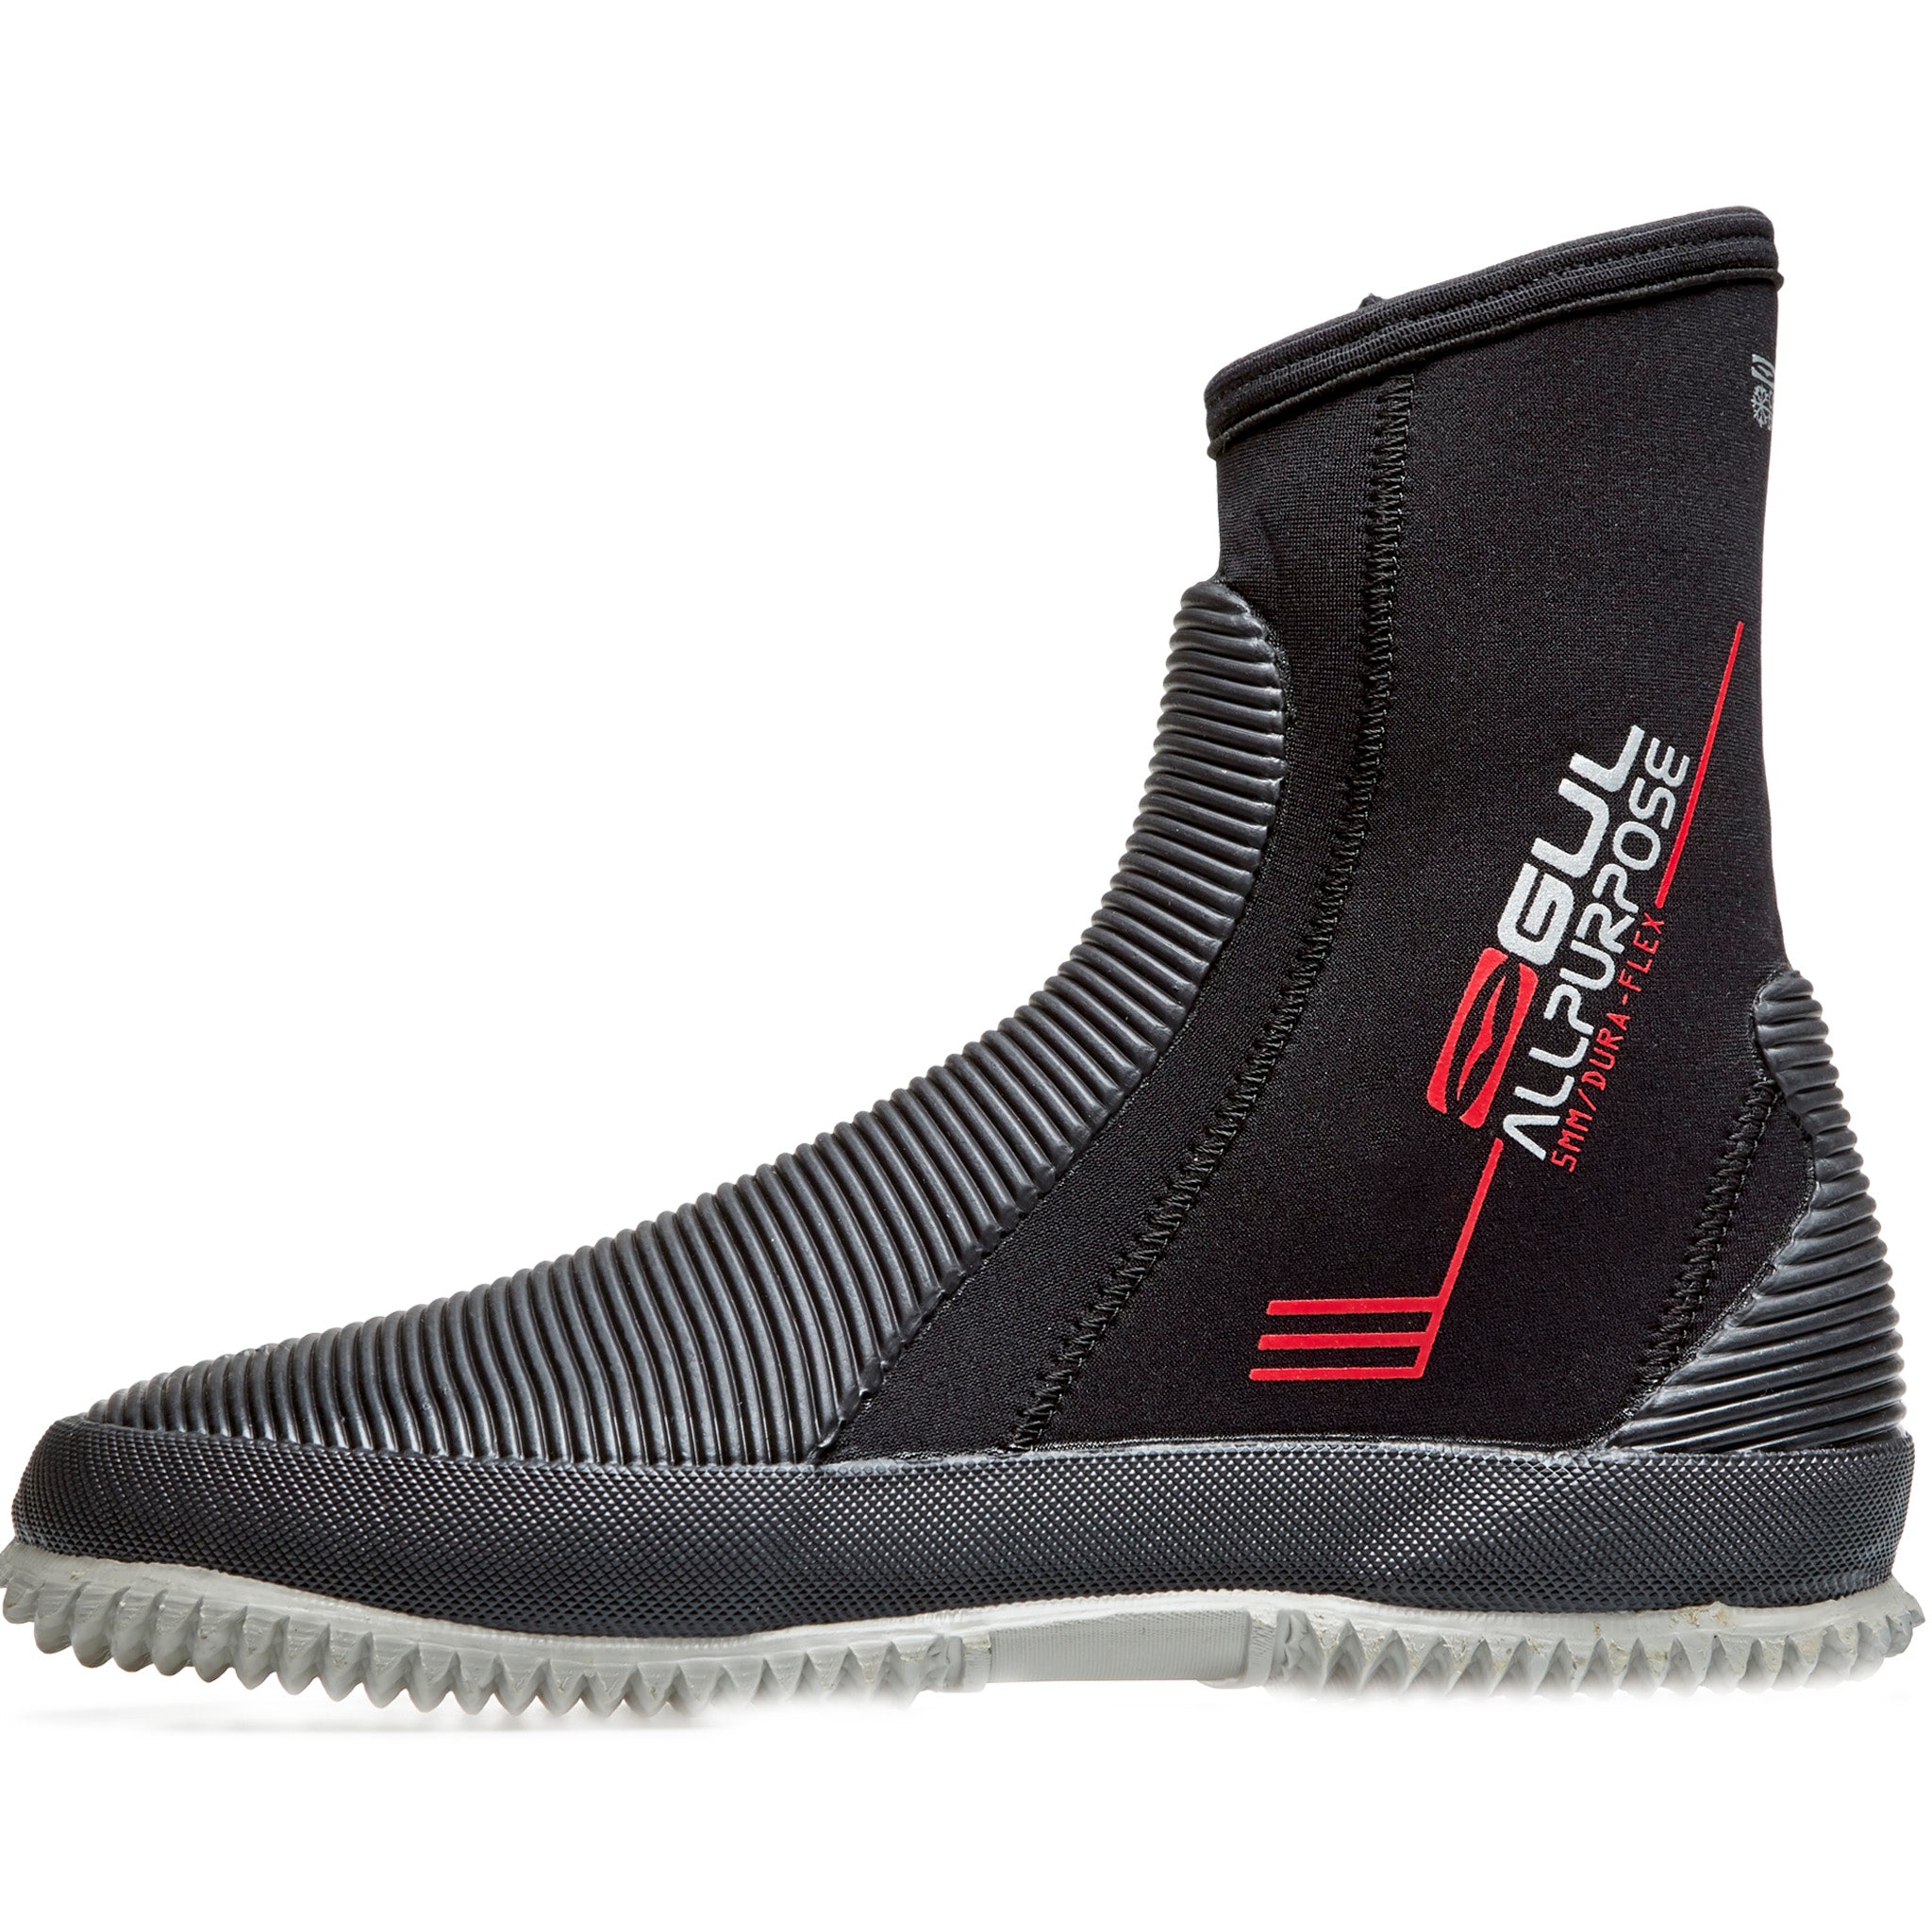 Gul All Purpose 5mm Zipped Dinghy Wetsuit Boots - Black